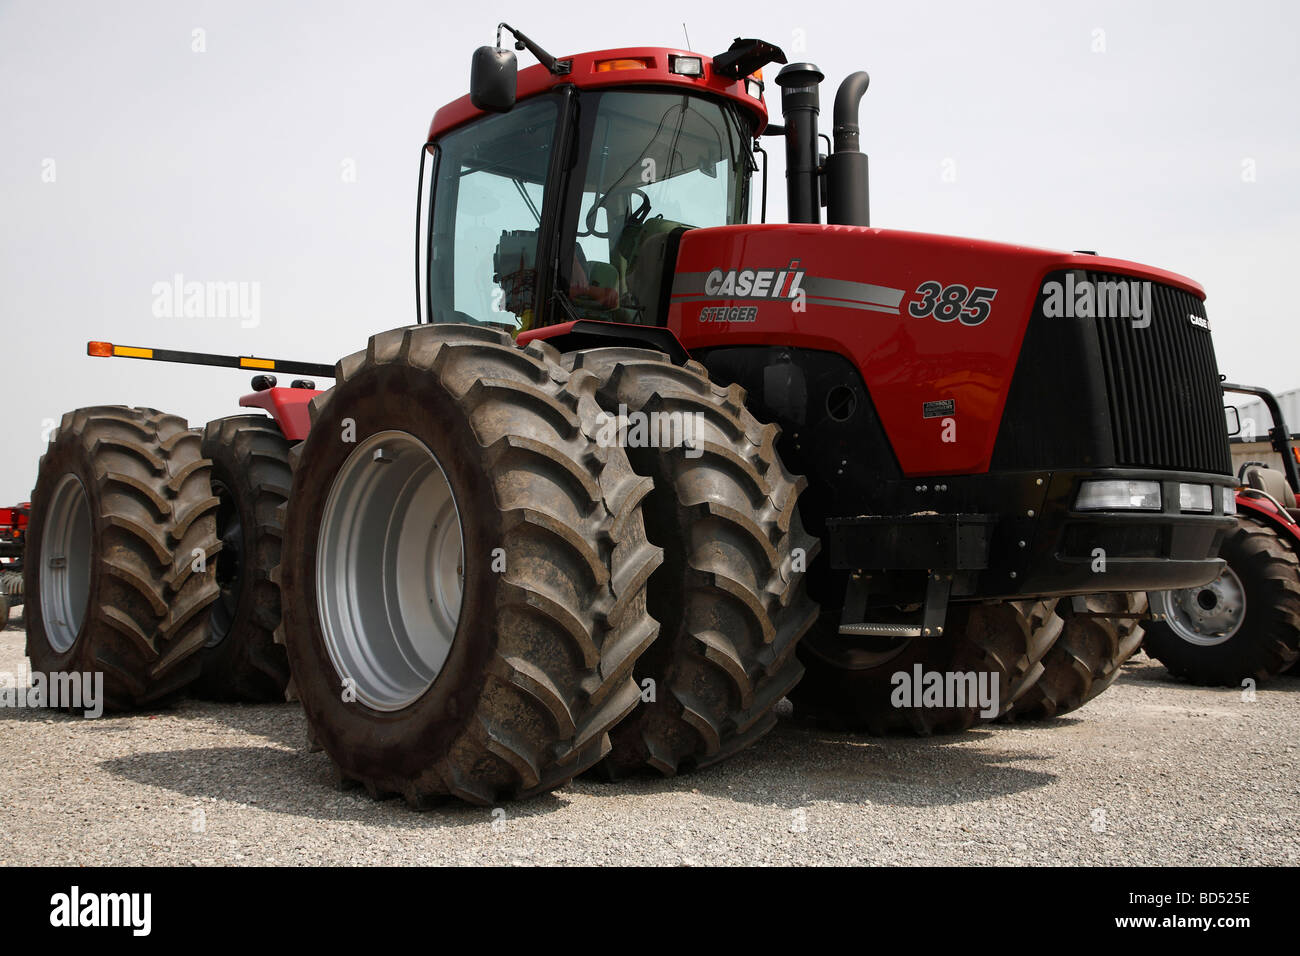 agricultural agriculture Case farming Heavy duty equipment machine machines  tractor tractors American USA Stock Photo - Alamy